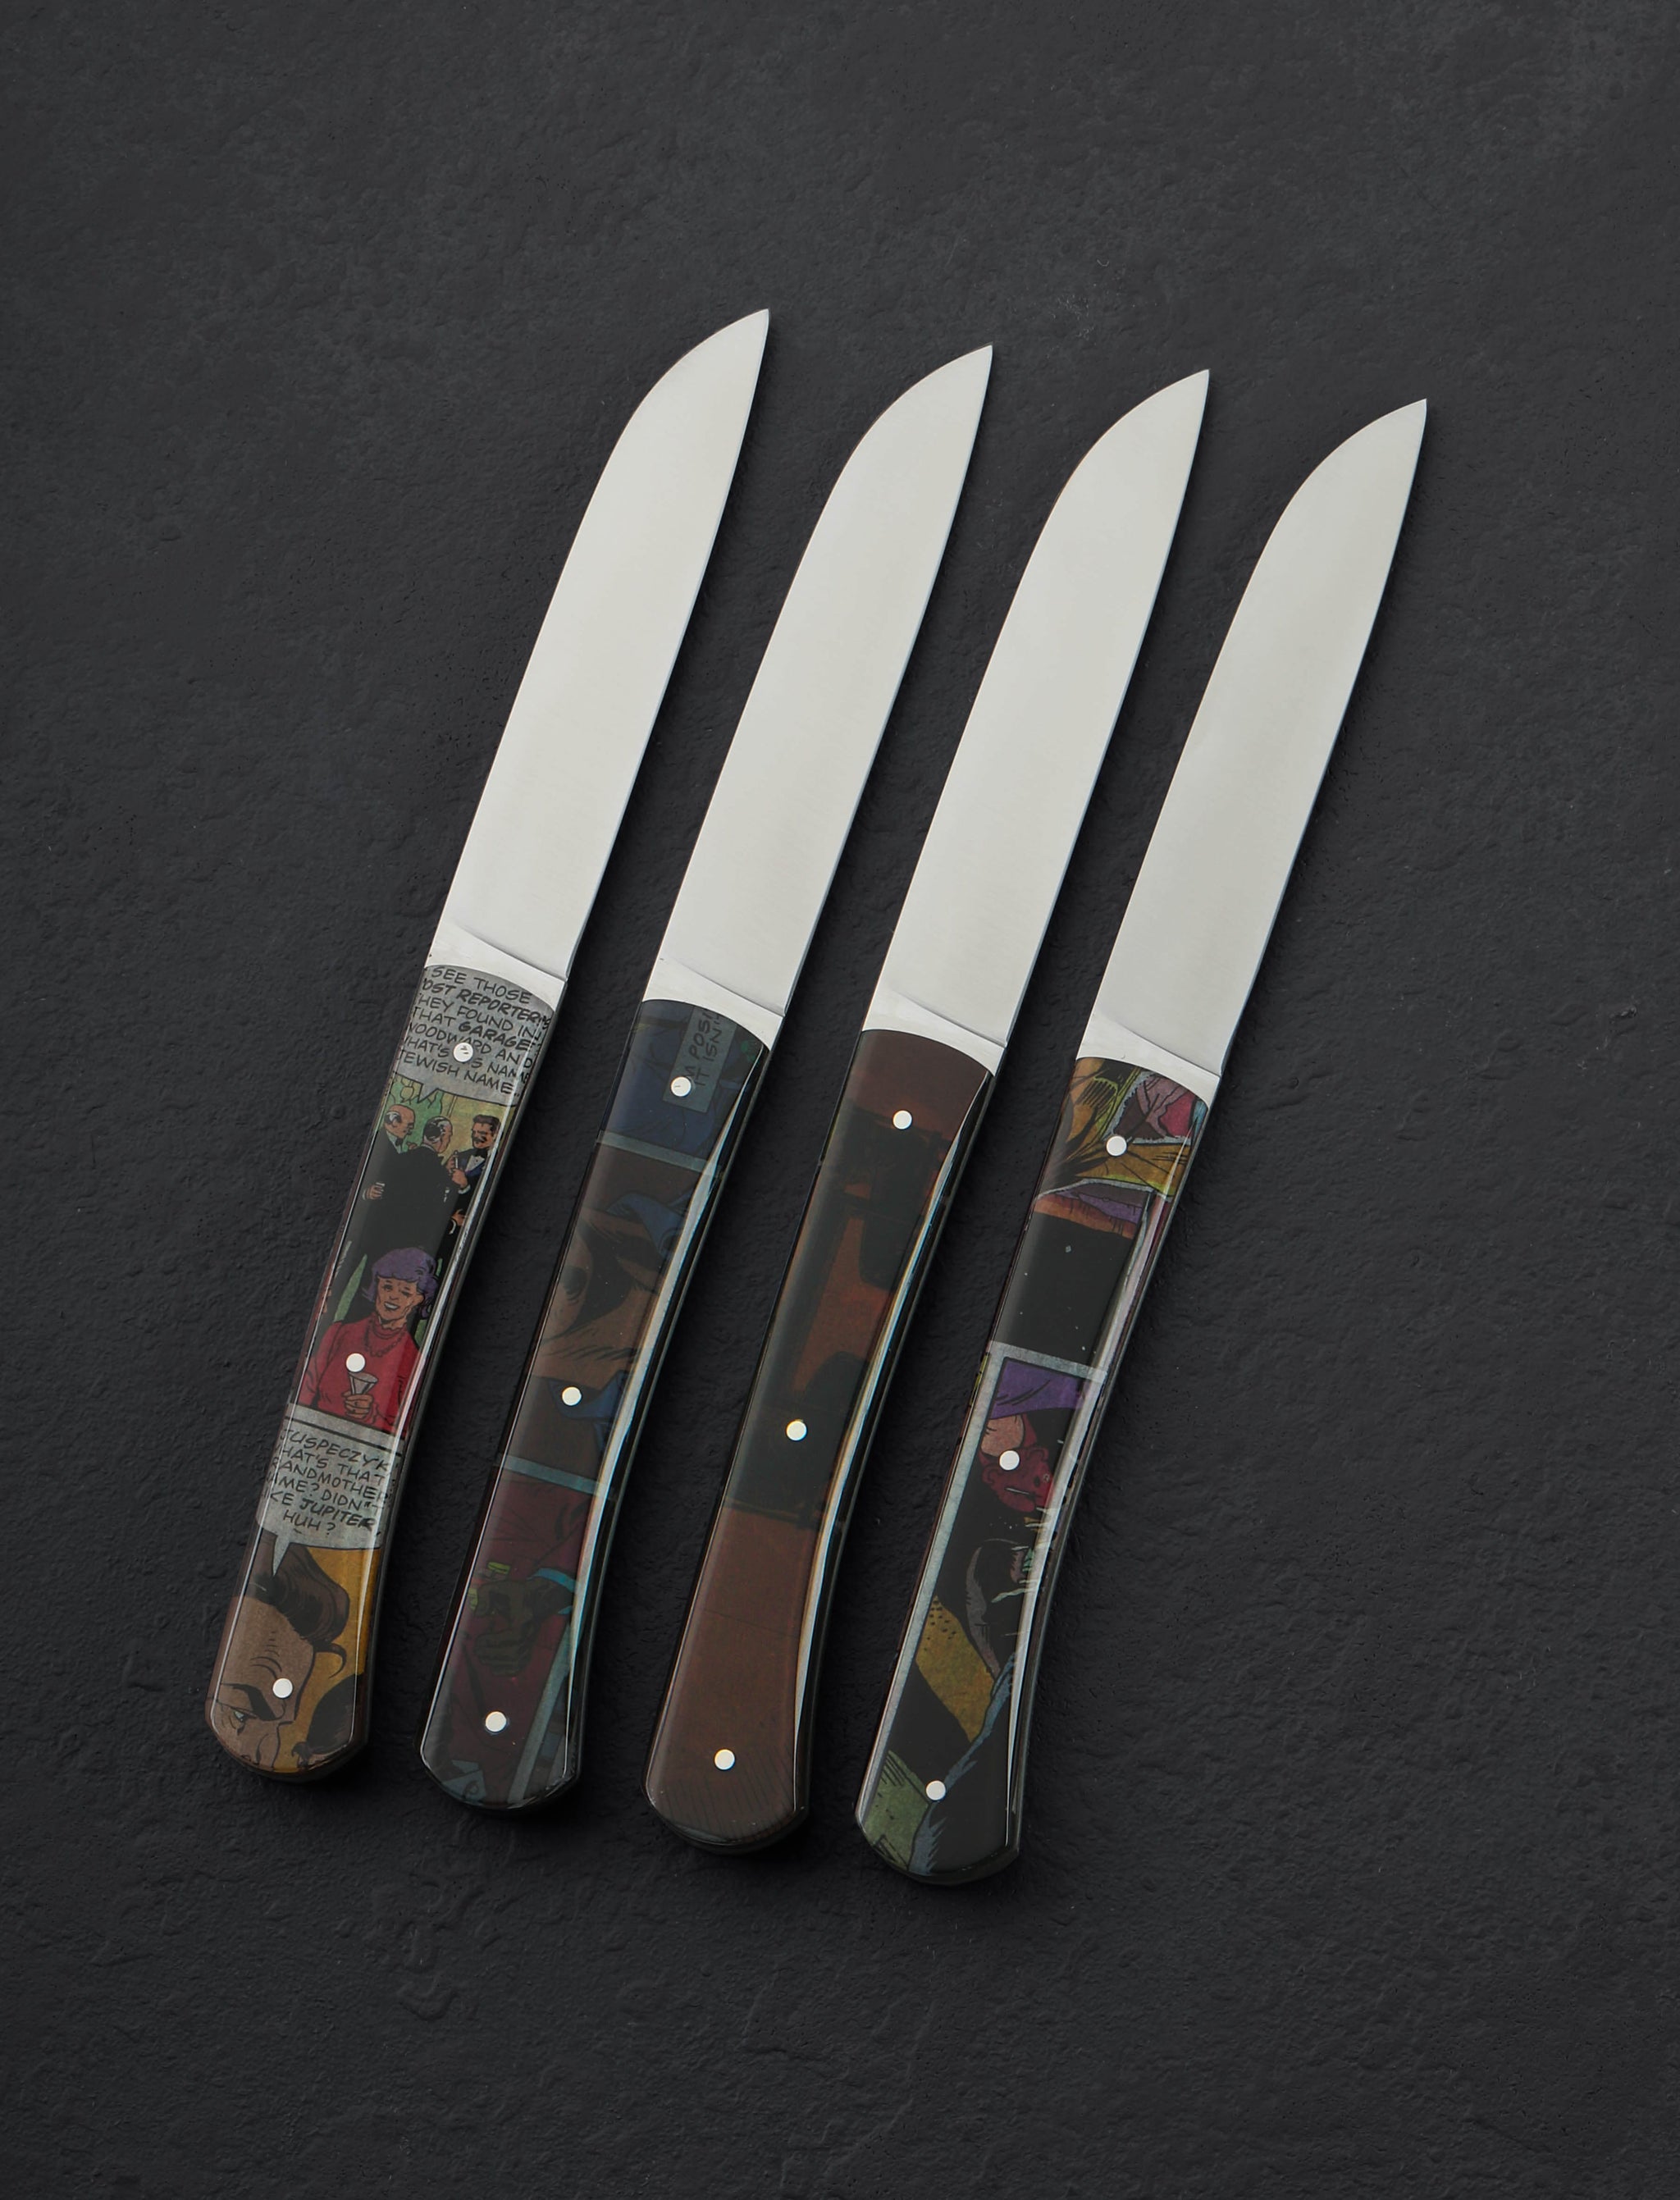 Roland Lannier - France Table Knives Comic Book Table Knife Set